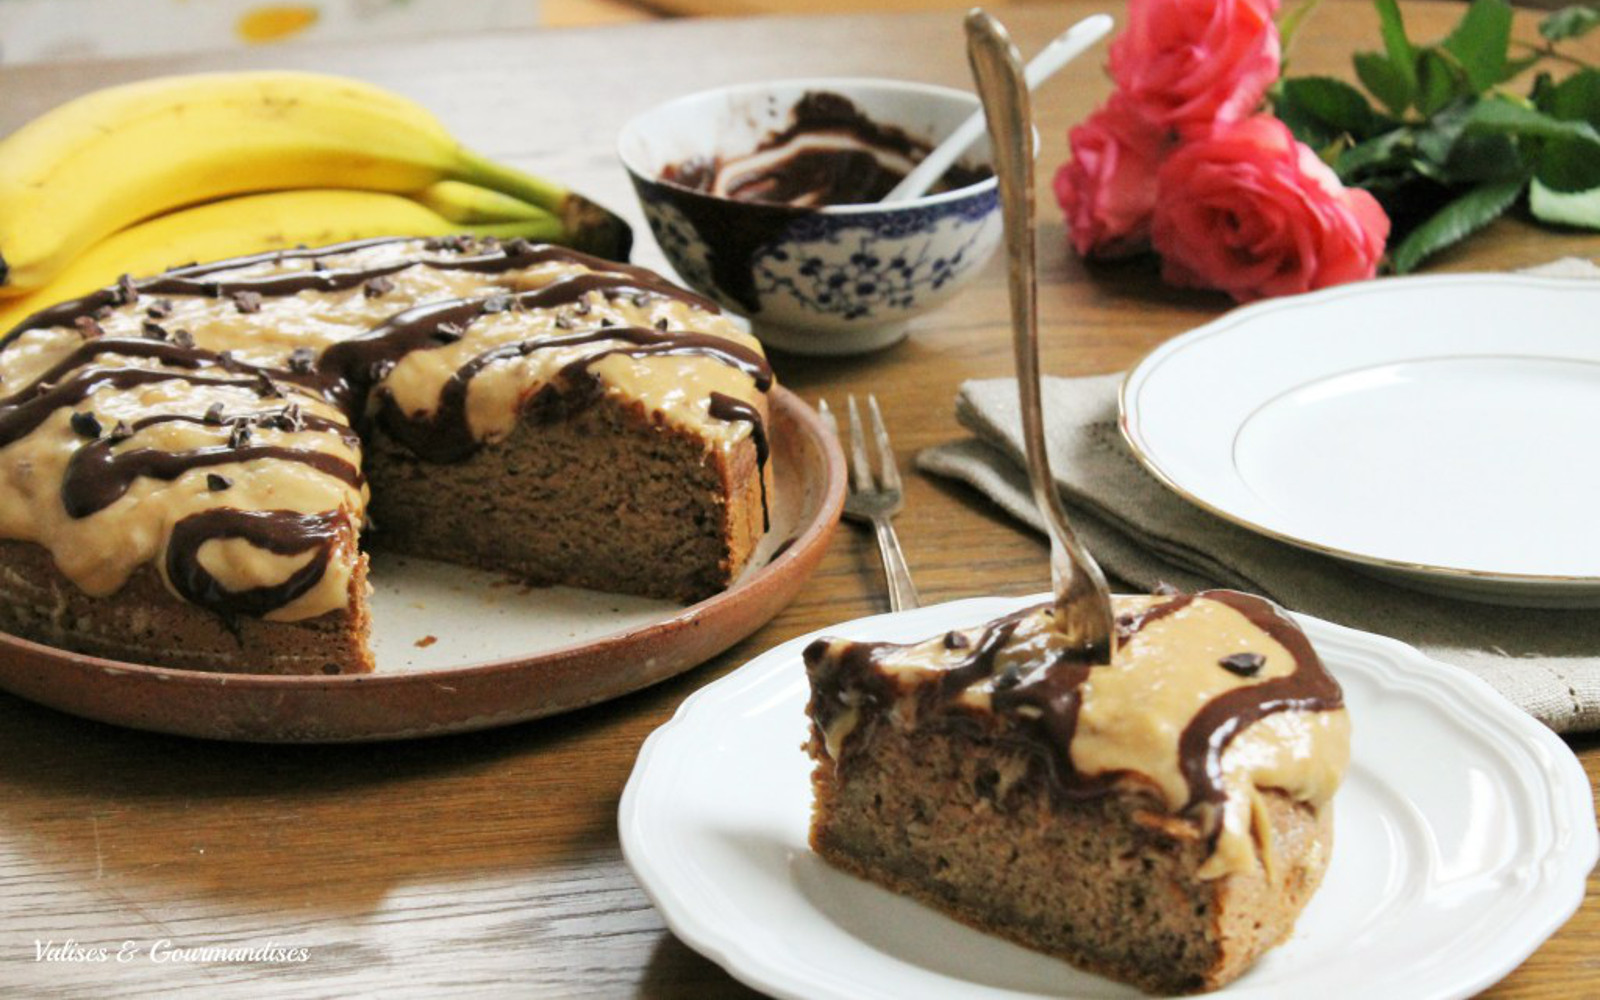 Peanut Butter, Banana, and Chocolate Desserts!